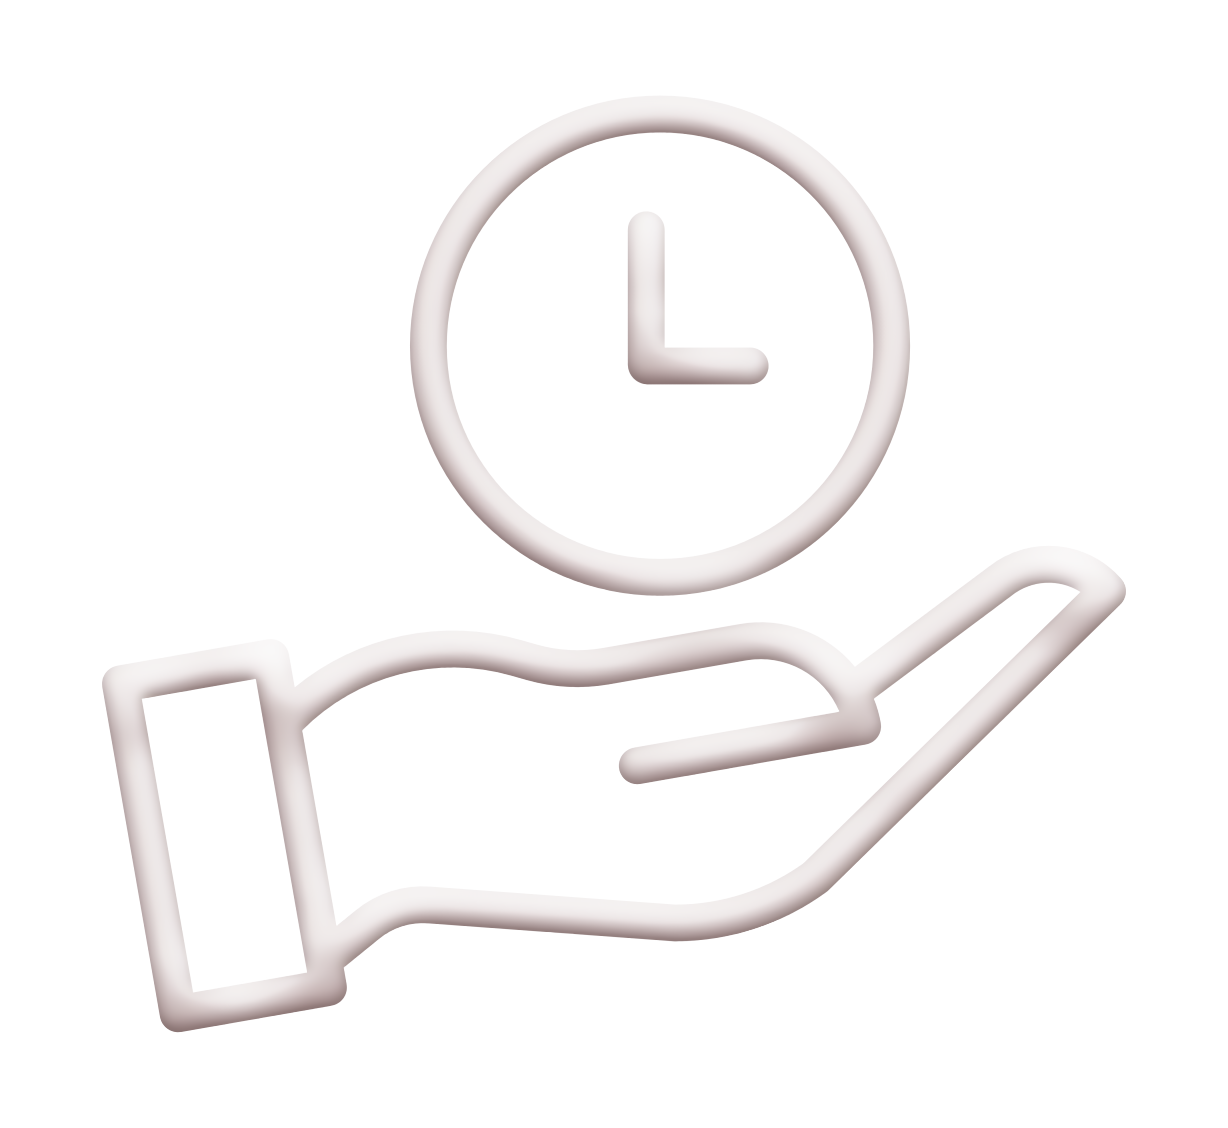 transparent-hand-icon-time-management-icon-save-time-icon-5faf07ba5e0be8.4794032016053062983852